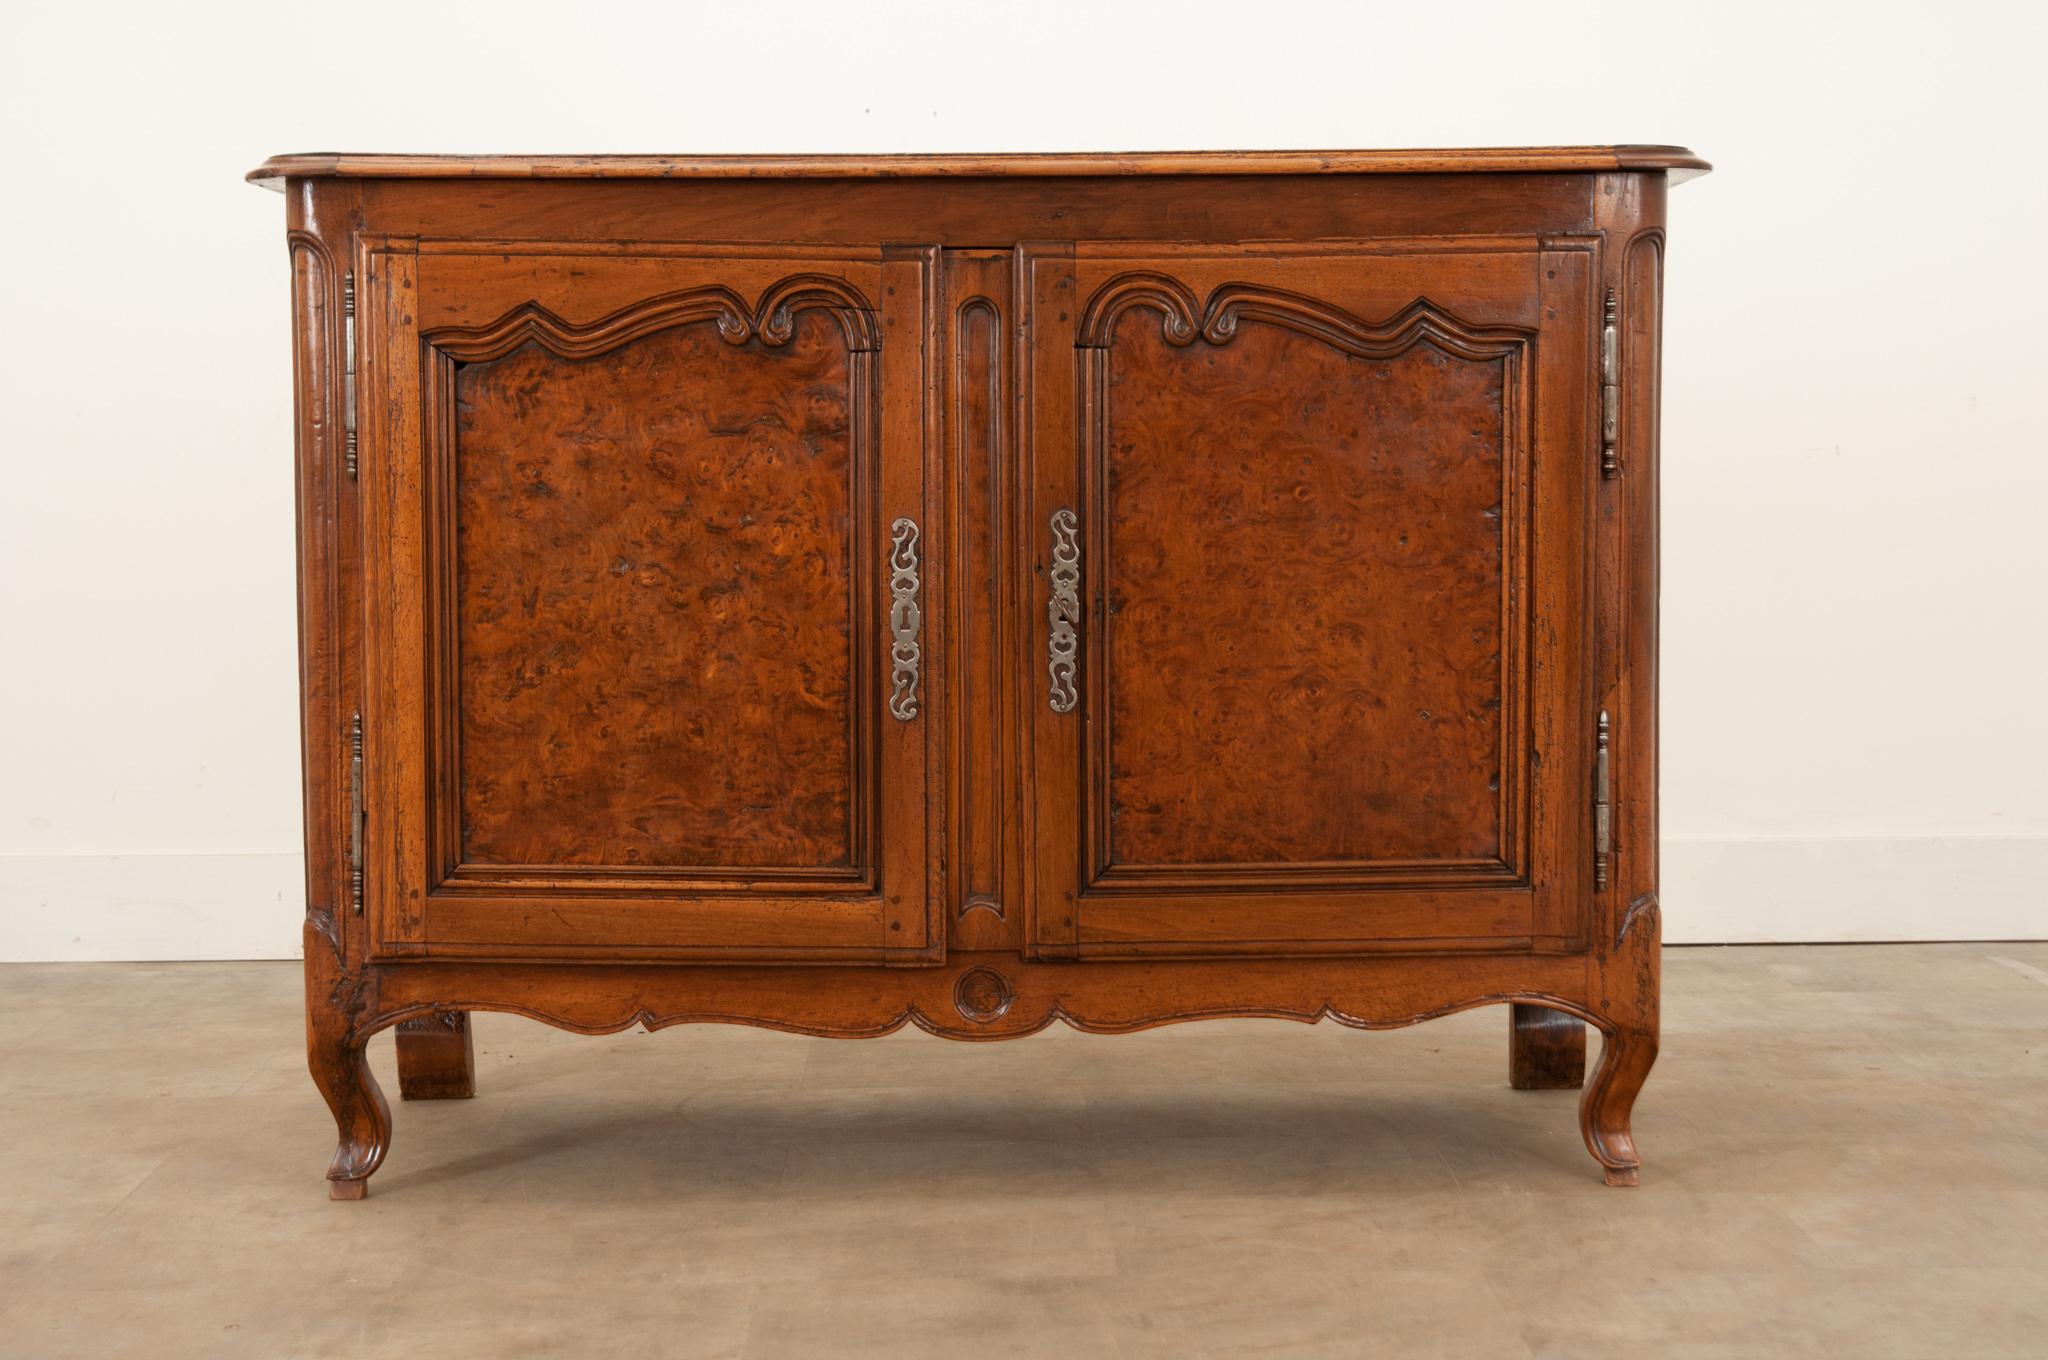 A beautiful solid walnut buffet, made in France circa 1790. The case antique is made with Provincial charm and style with burl walnut panels set into the shapely carved doors. These doors are hung with steel barrel hinges and can be secured with its